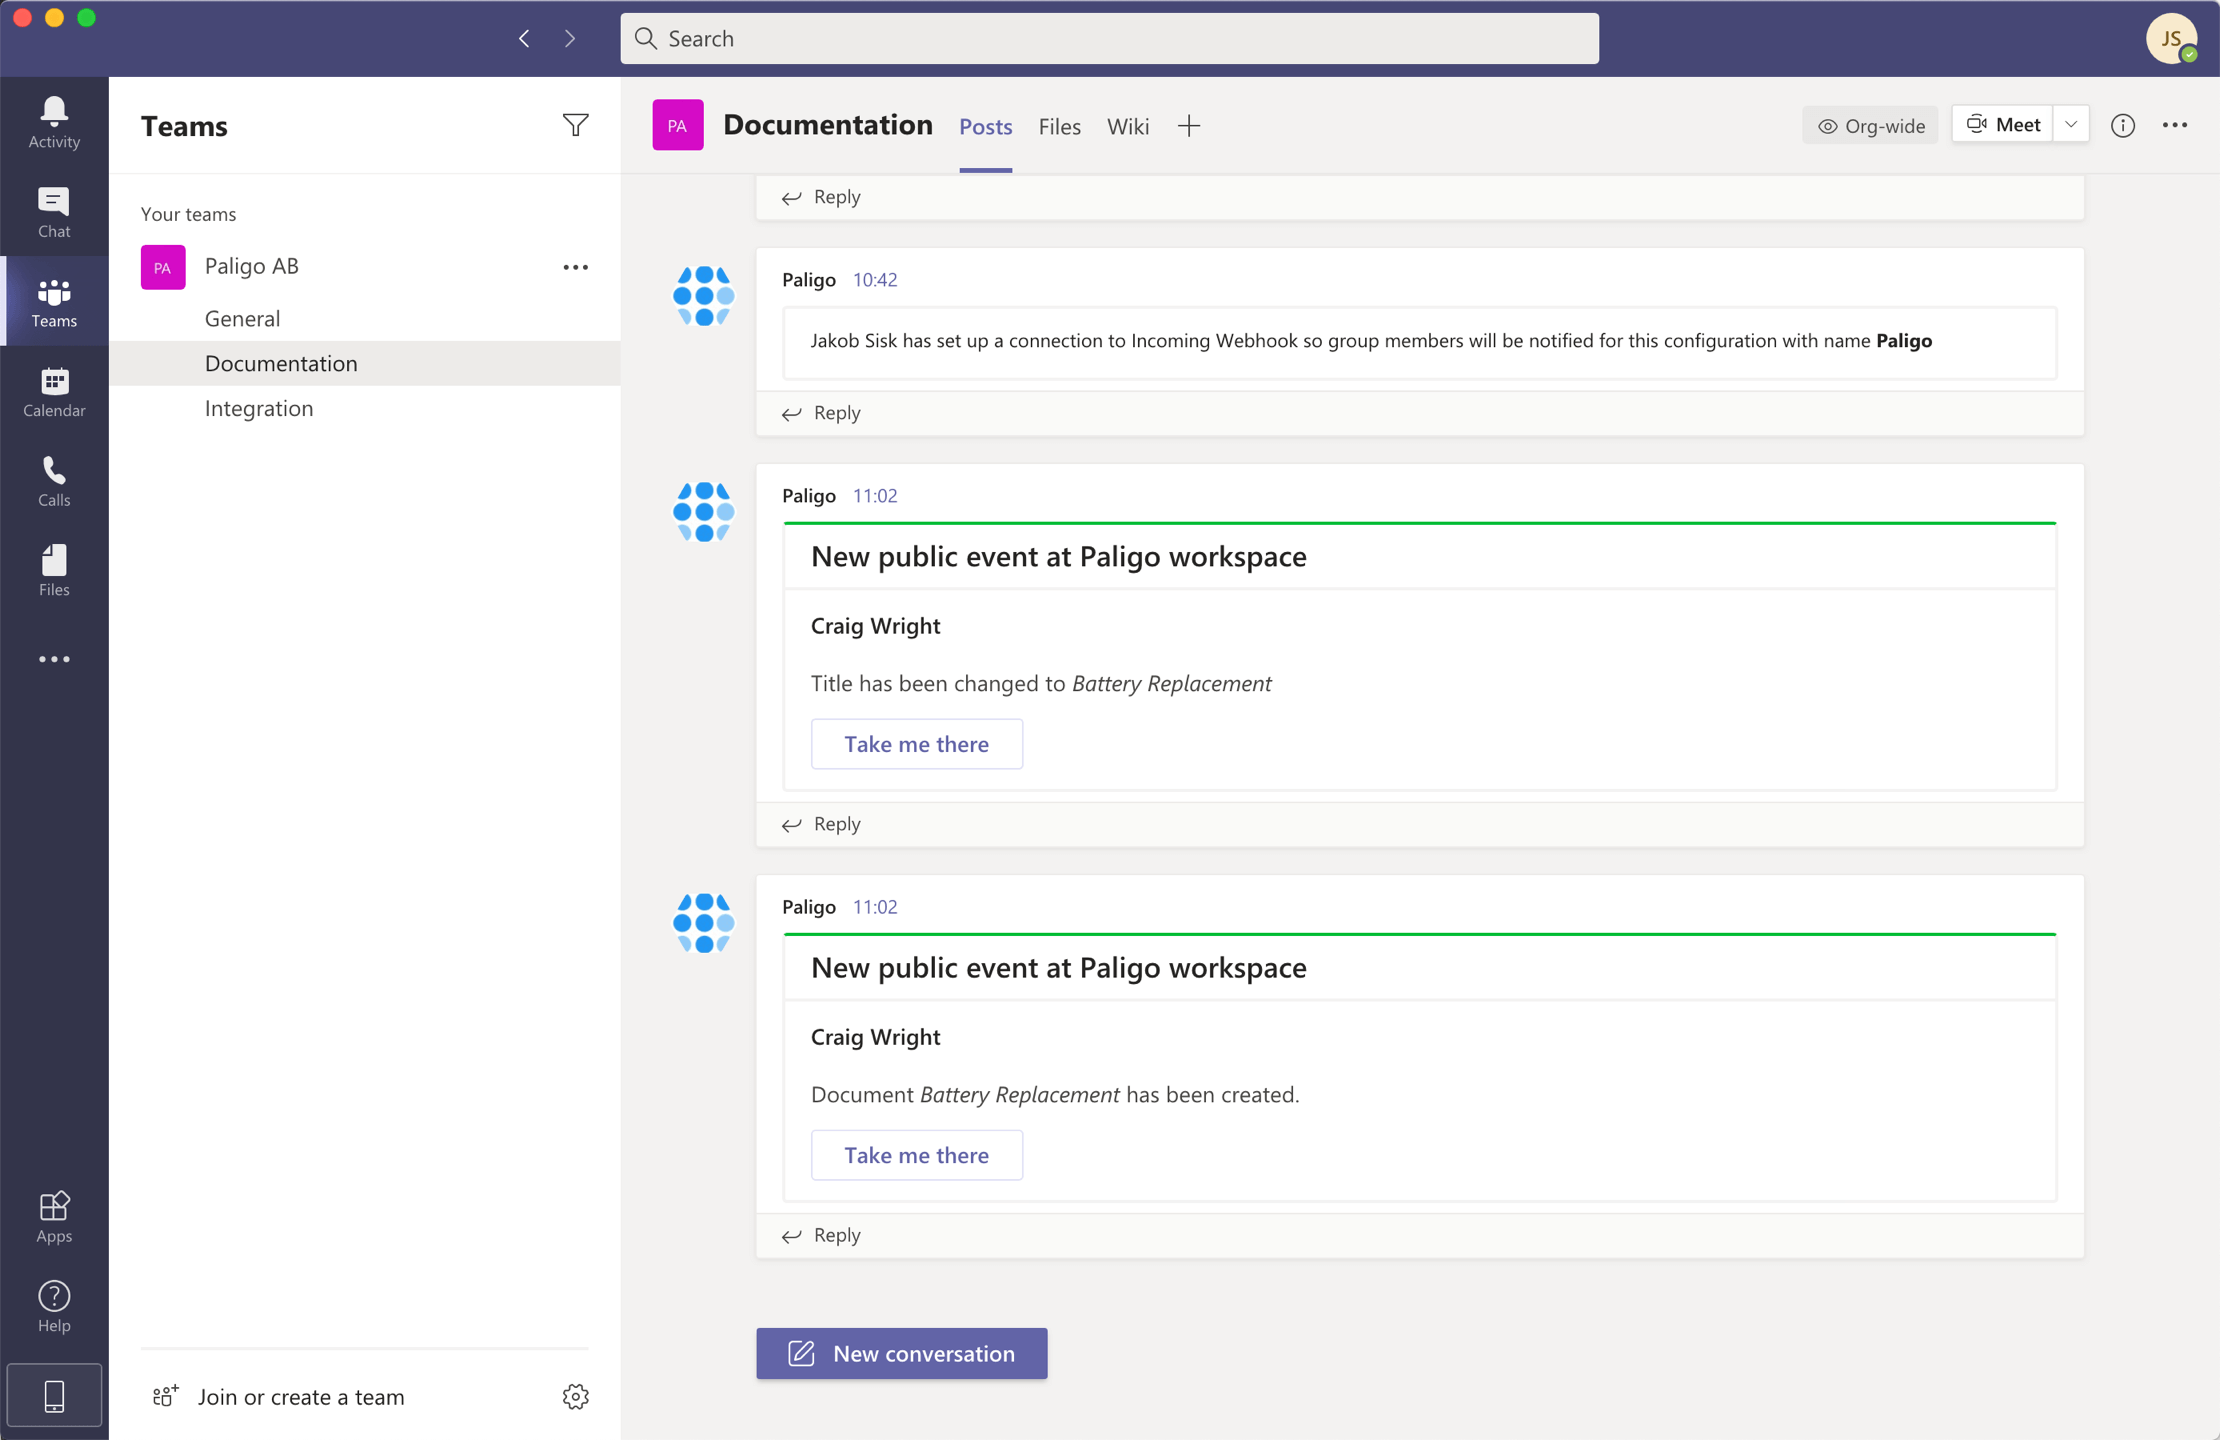 MS Teams showing the feed for a team channel. In the feed, there are channel notifications from Paligo.